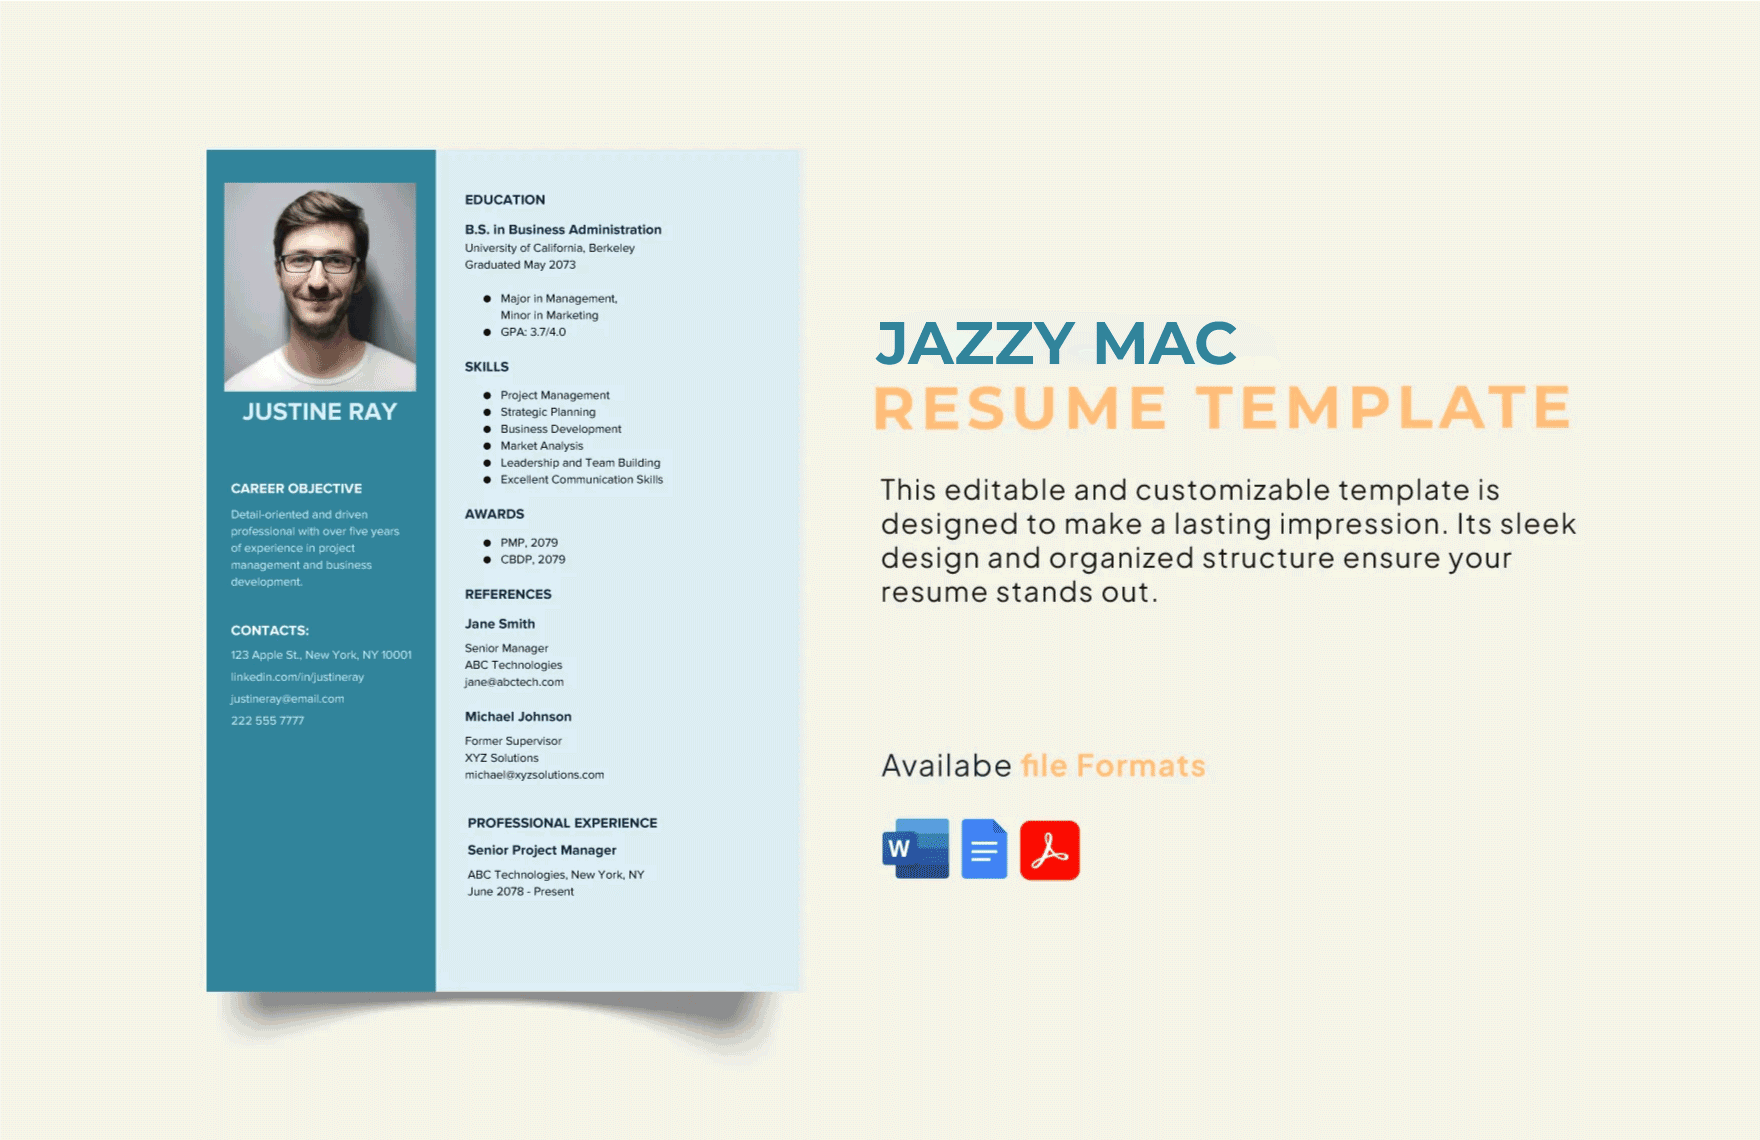 Free Jazzy Mac Resume Template in Word, Google Docs, PDF, Apple Pages